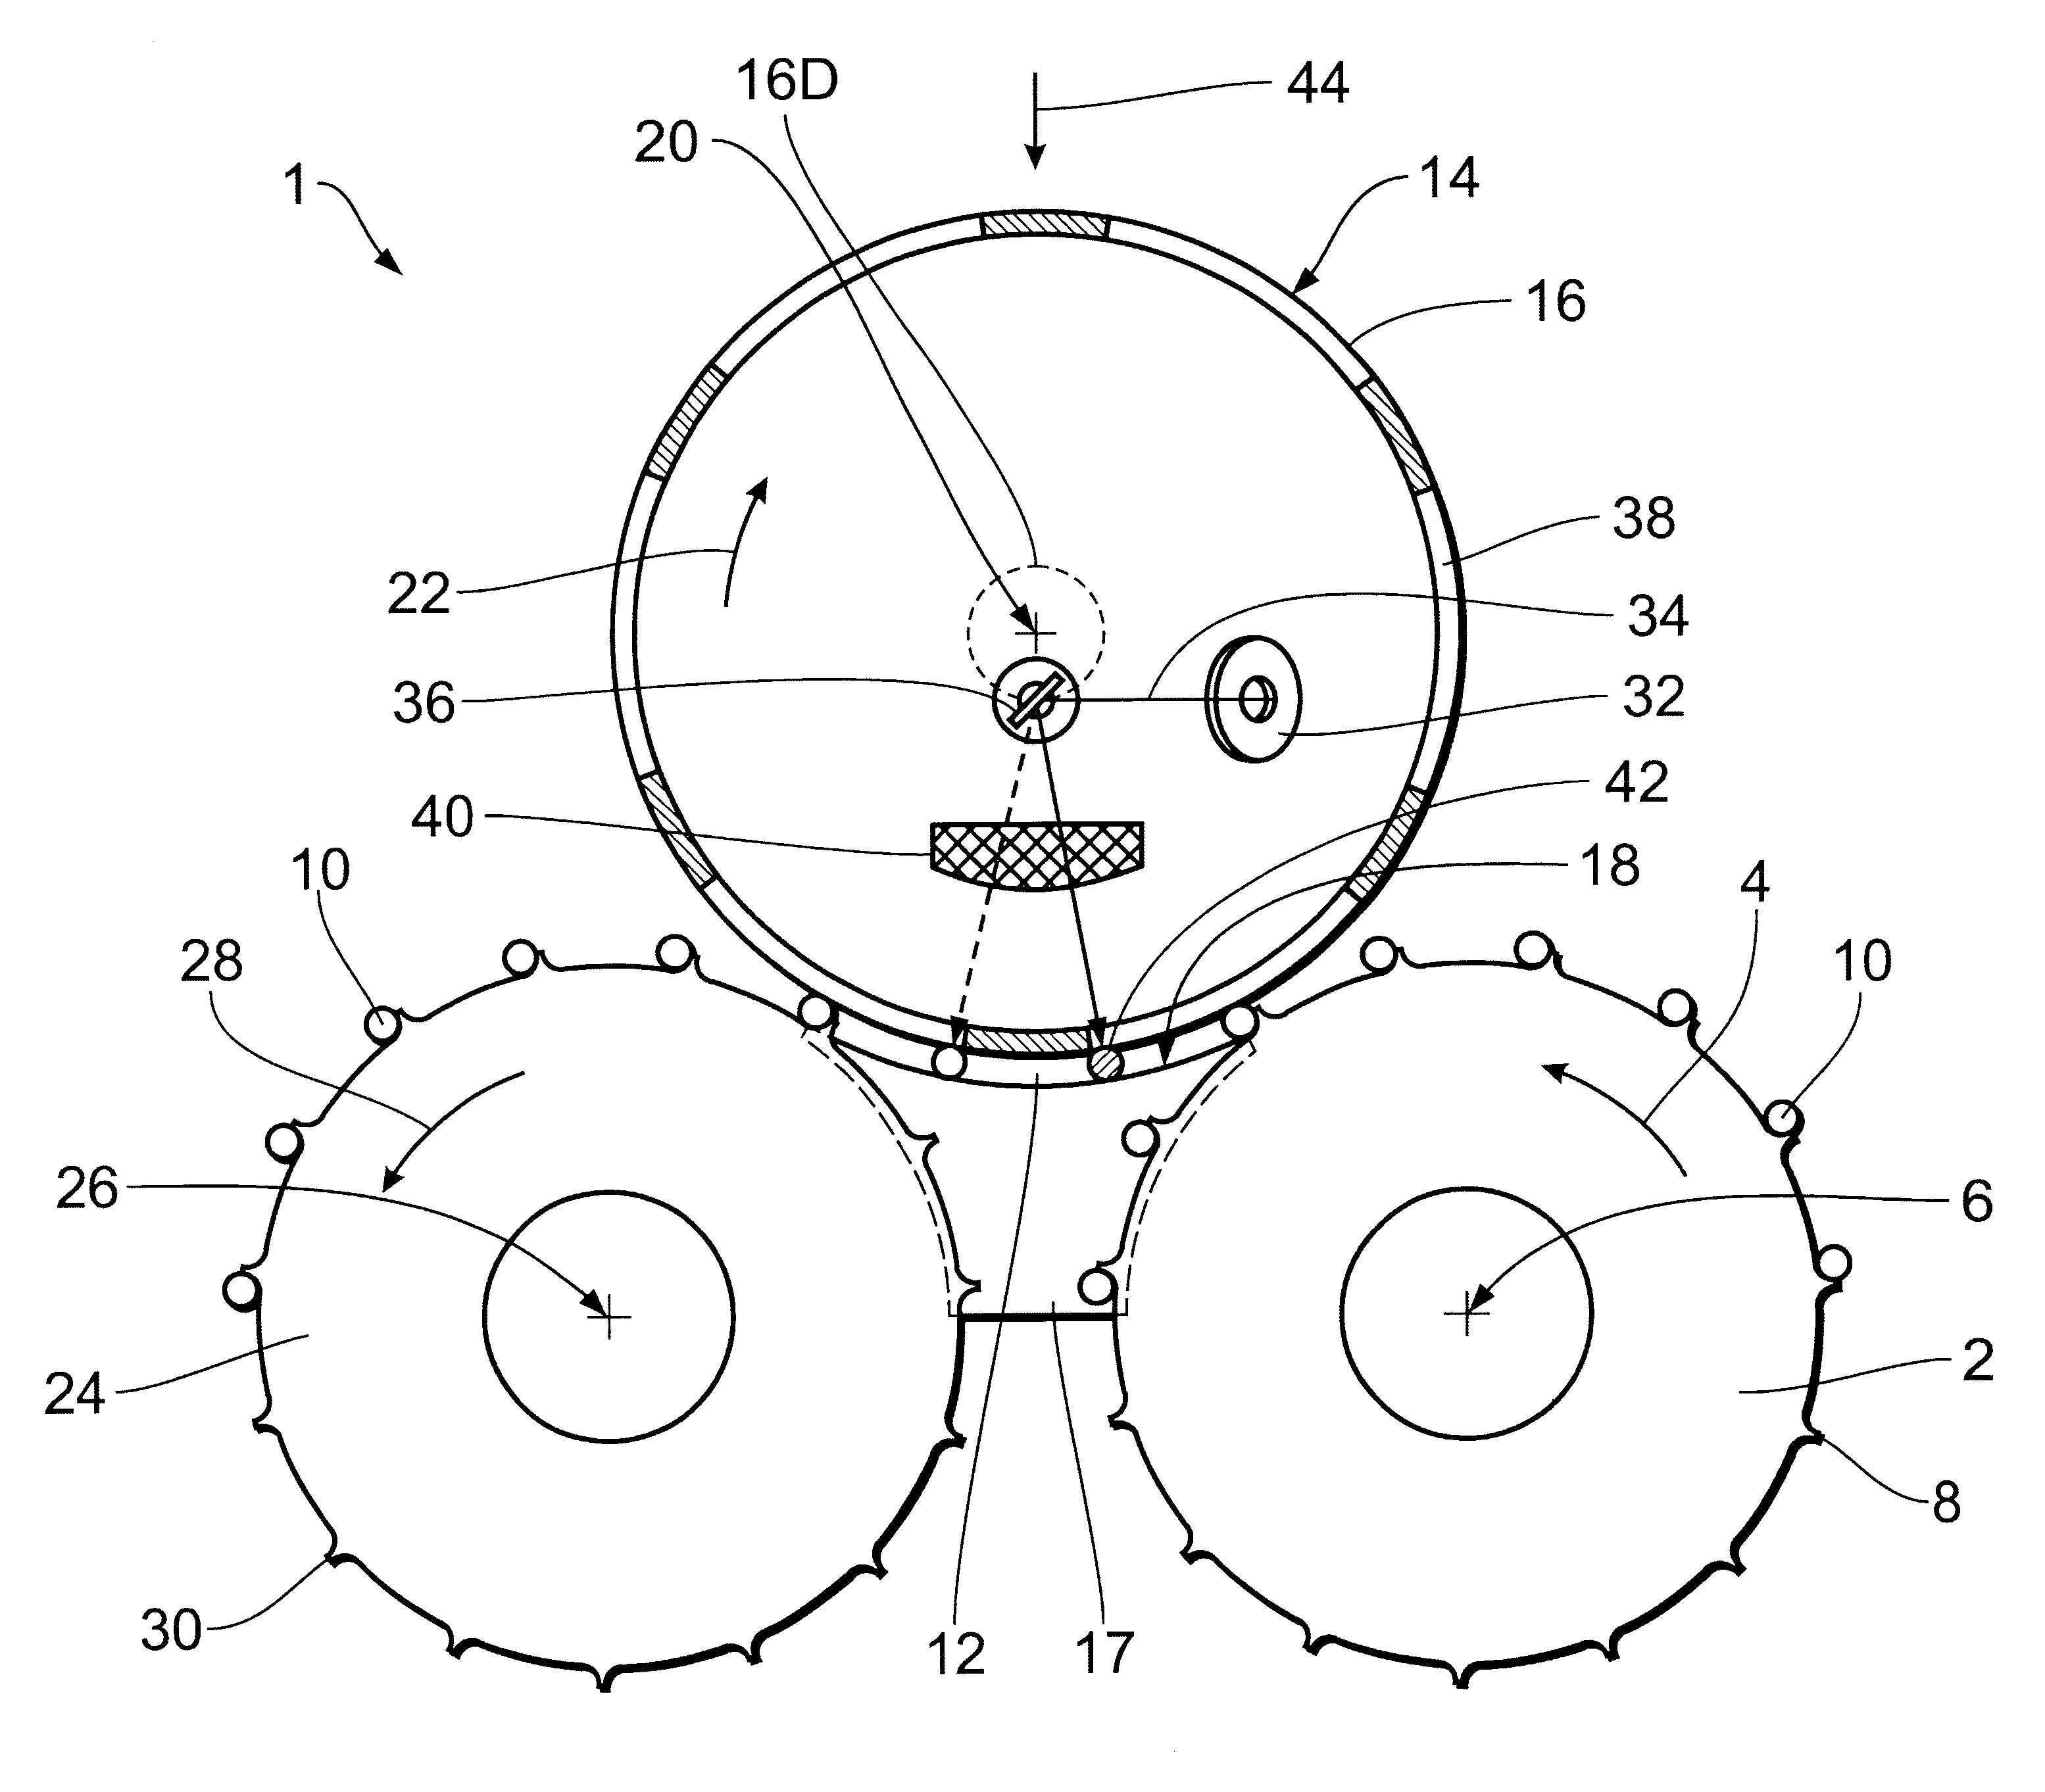 Apparatus for making perforations in the wrappers of rod-shaped products